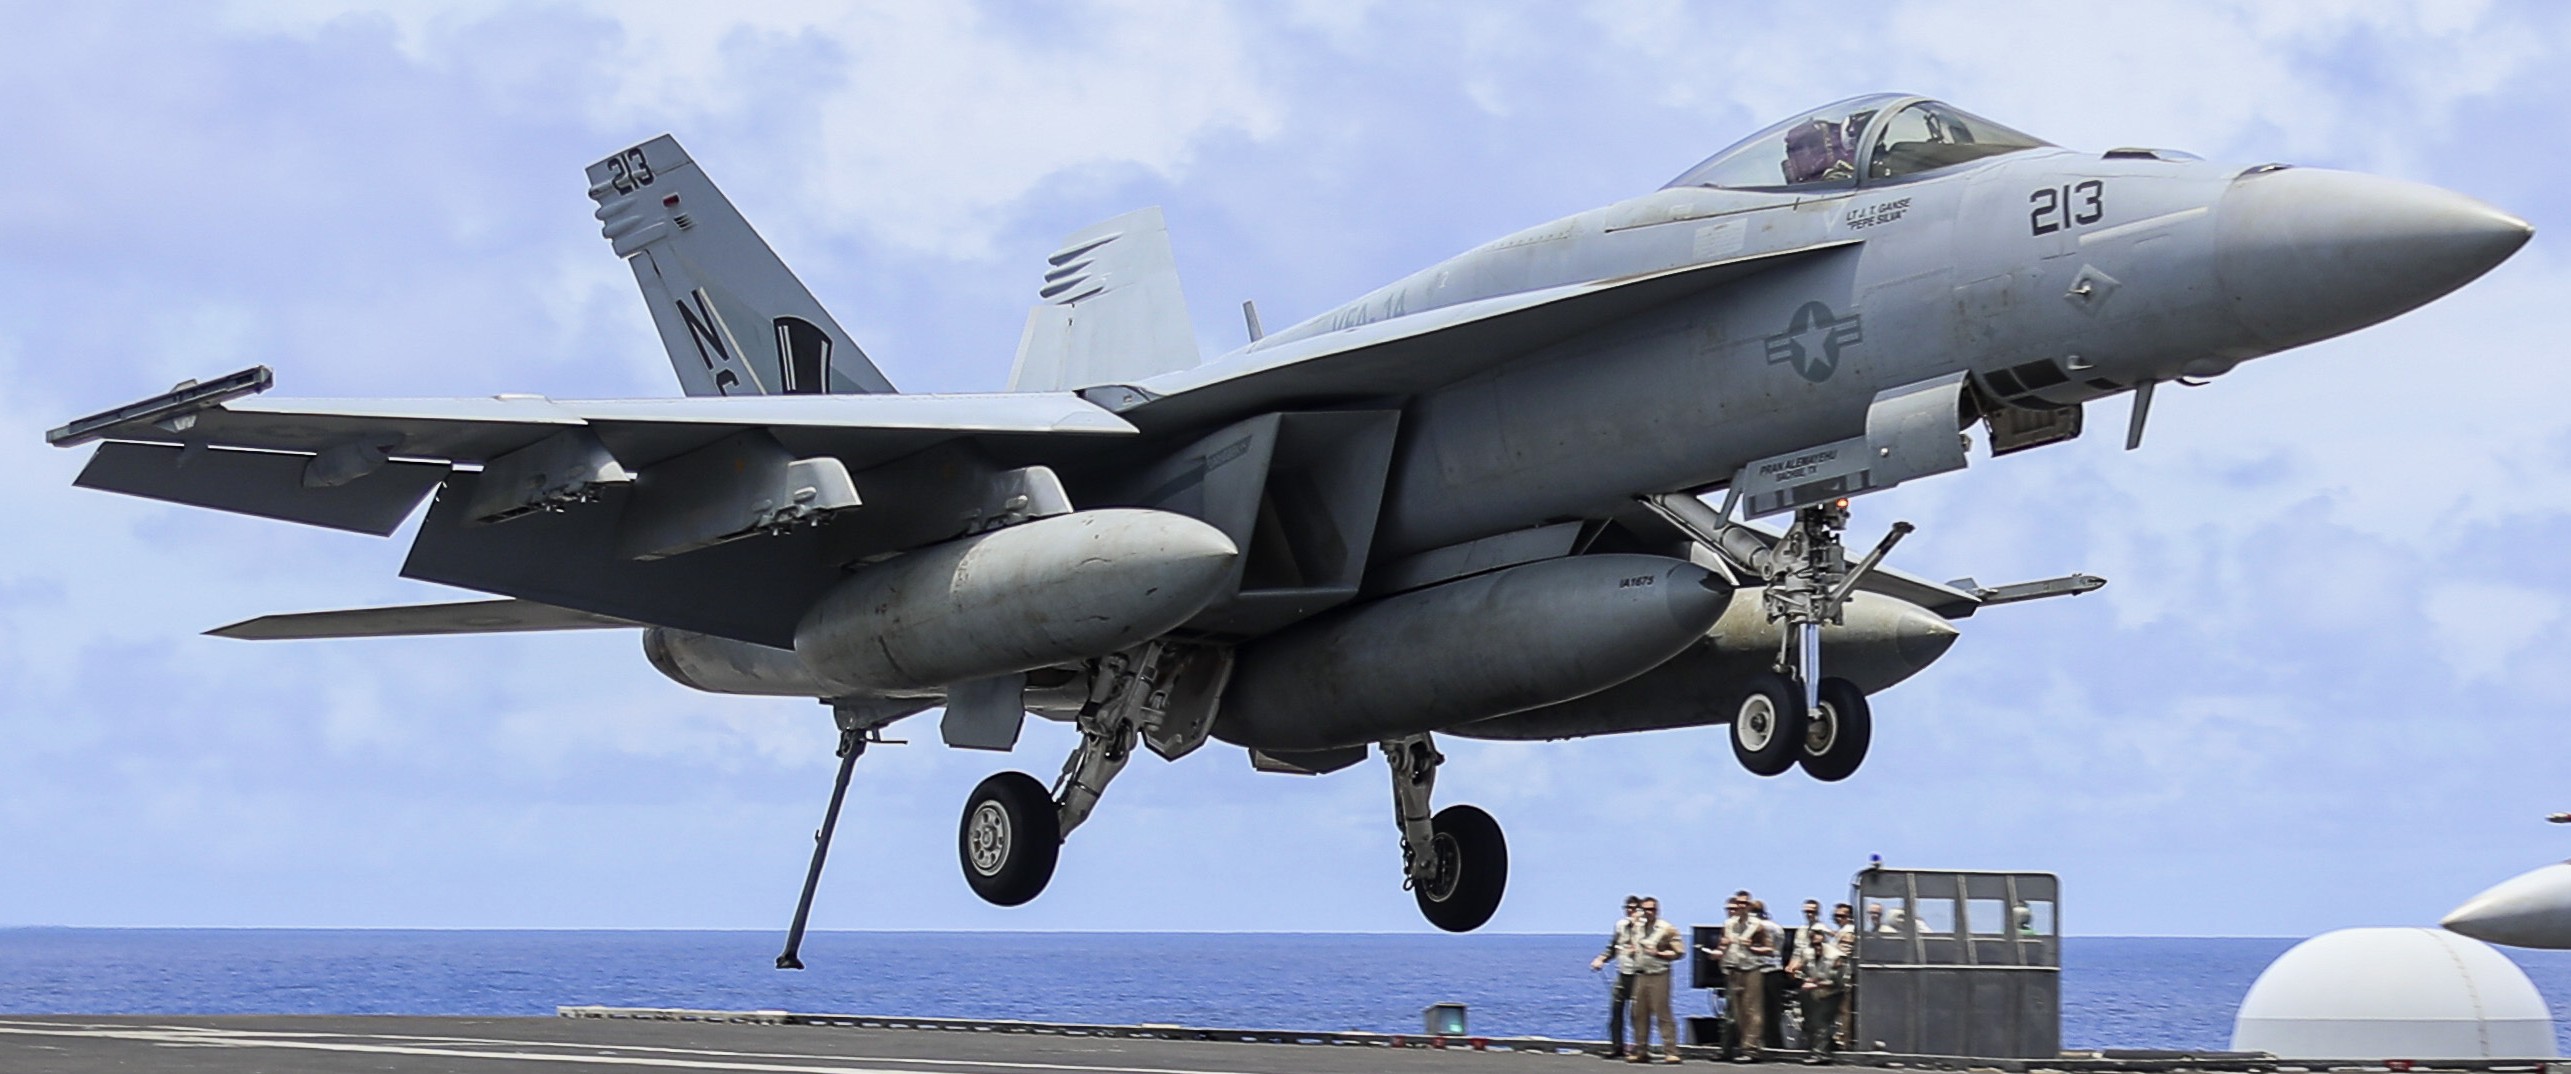 vfa-14 tophatters strike fighter squadron f/a-18e super hornet cvn-72 uss abraham lincoln cvw-9 us navy 72